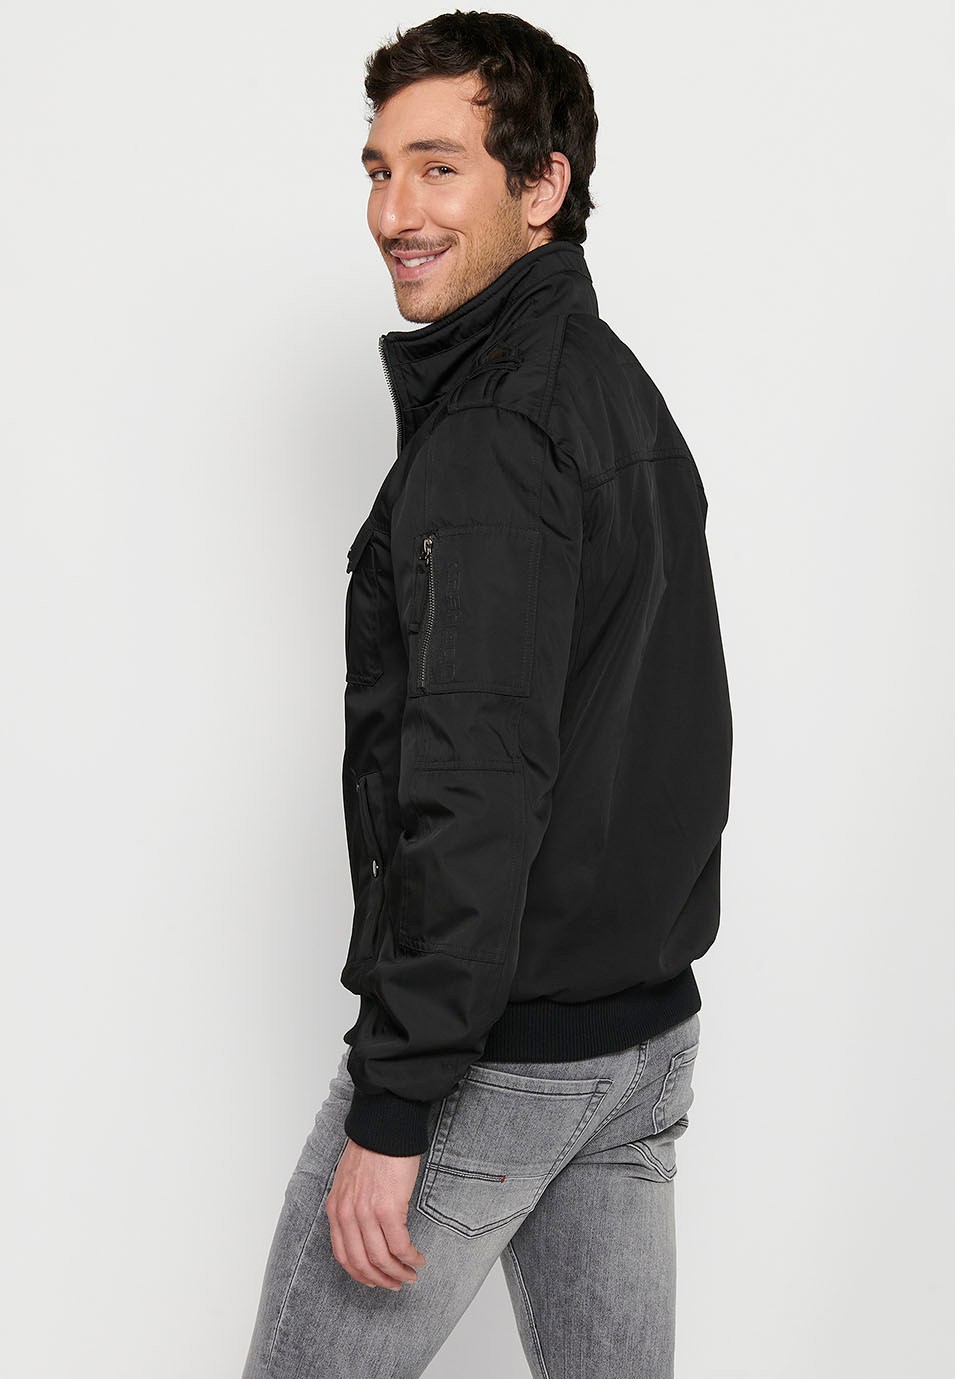 Black Long Sleeve Jacket with Round Neck and Front Zipper Closure with Flap Pockets for Men 7